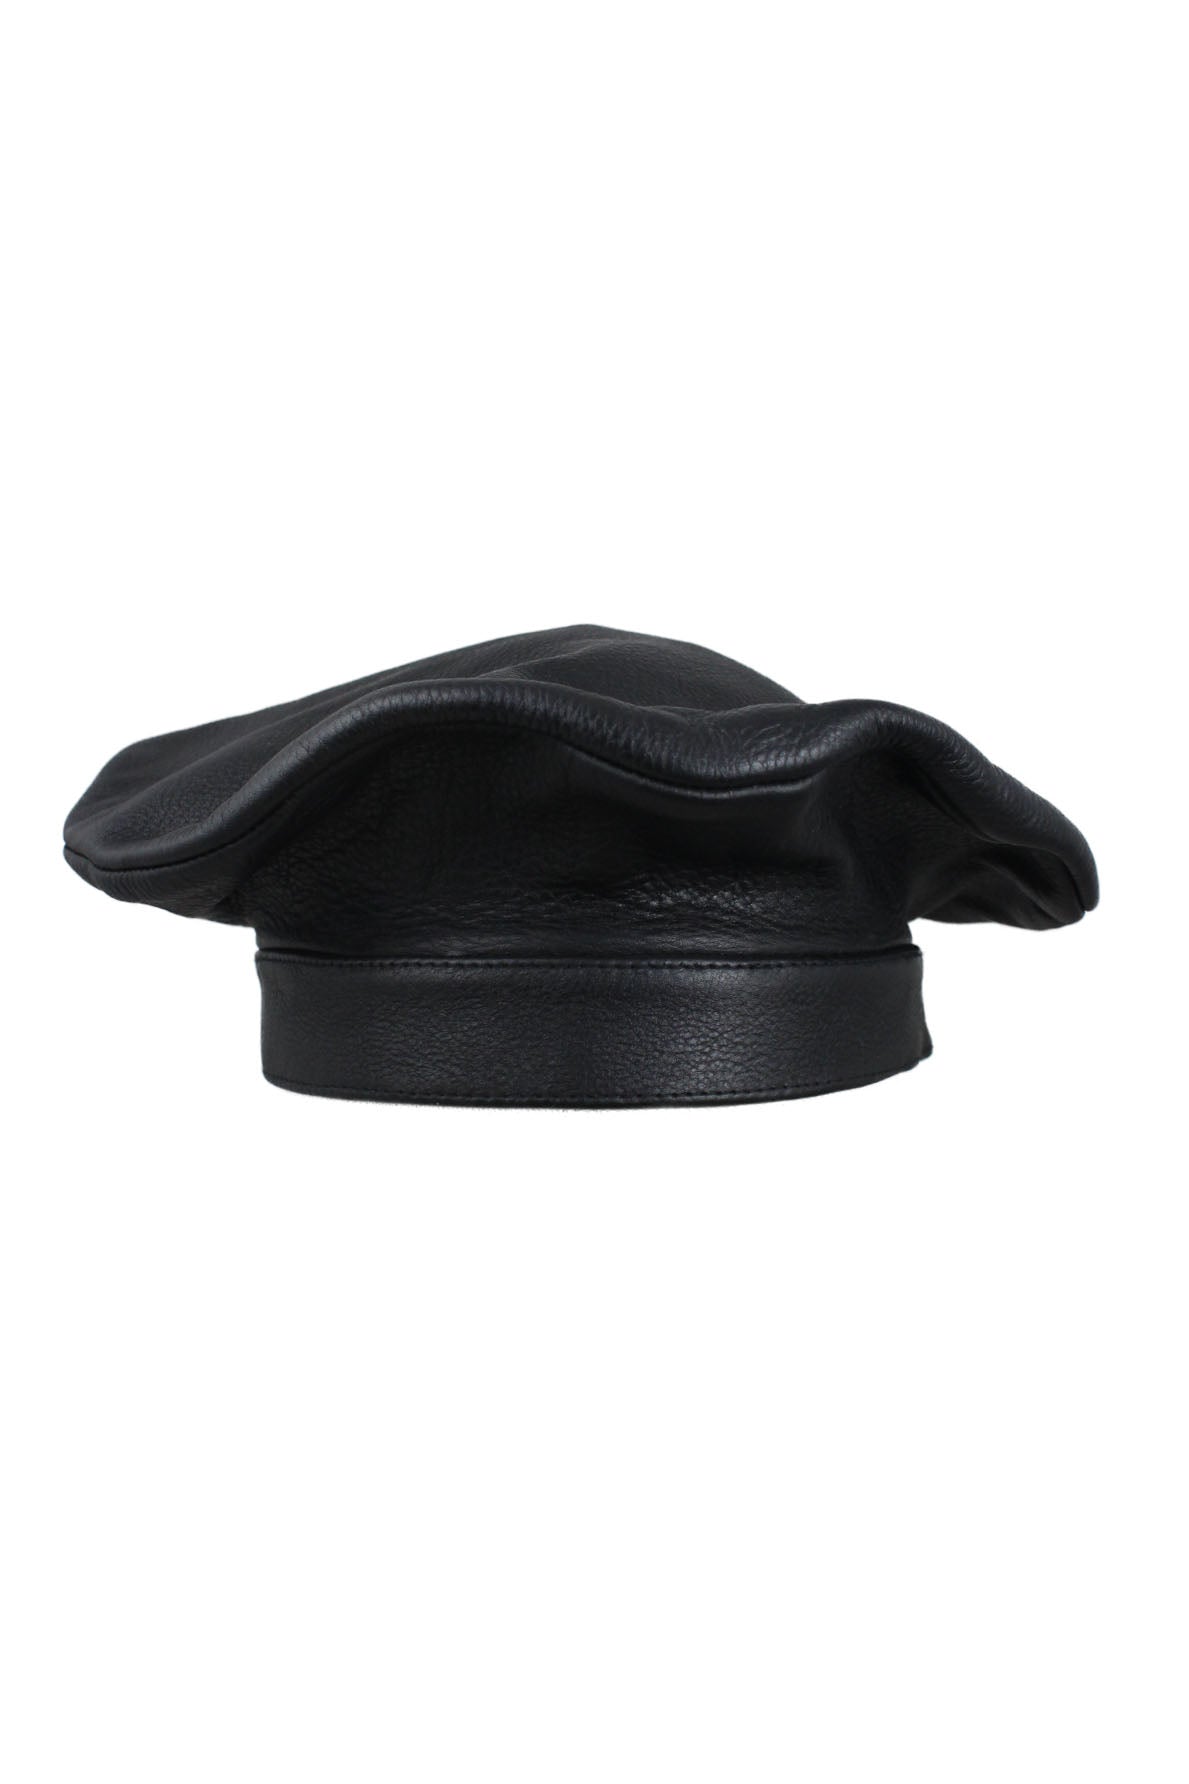 front of unlabeled black leather beret hat. 1" crown band, and aprox 9" diameter circular top. 